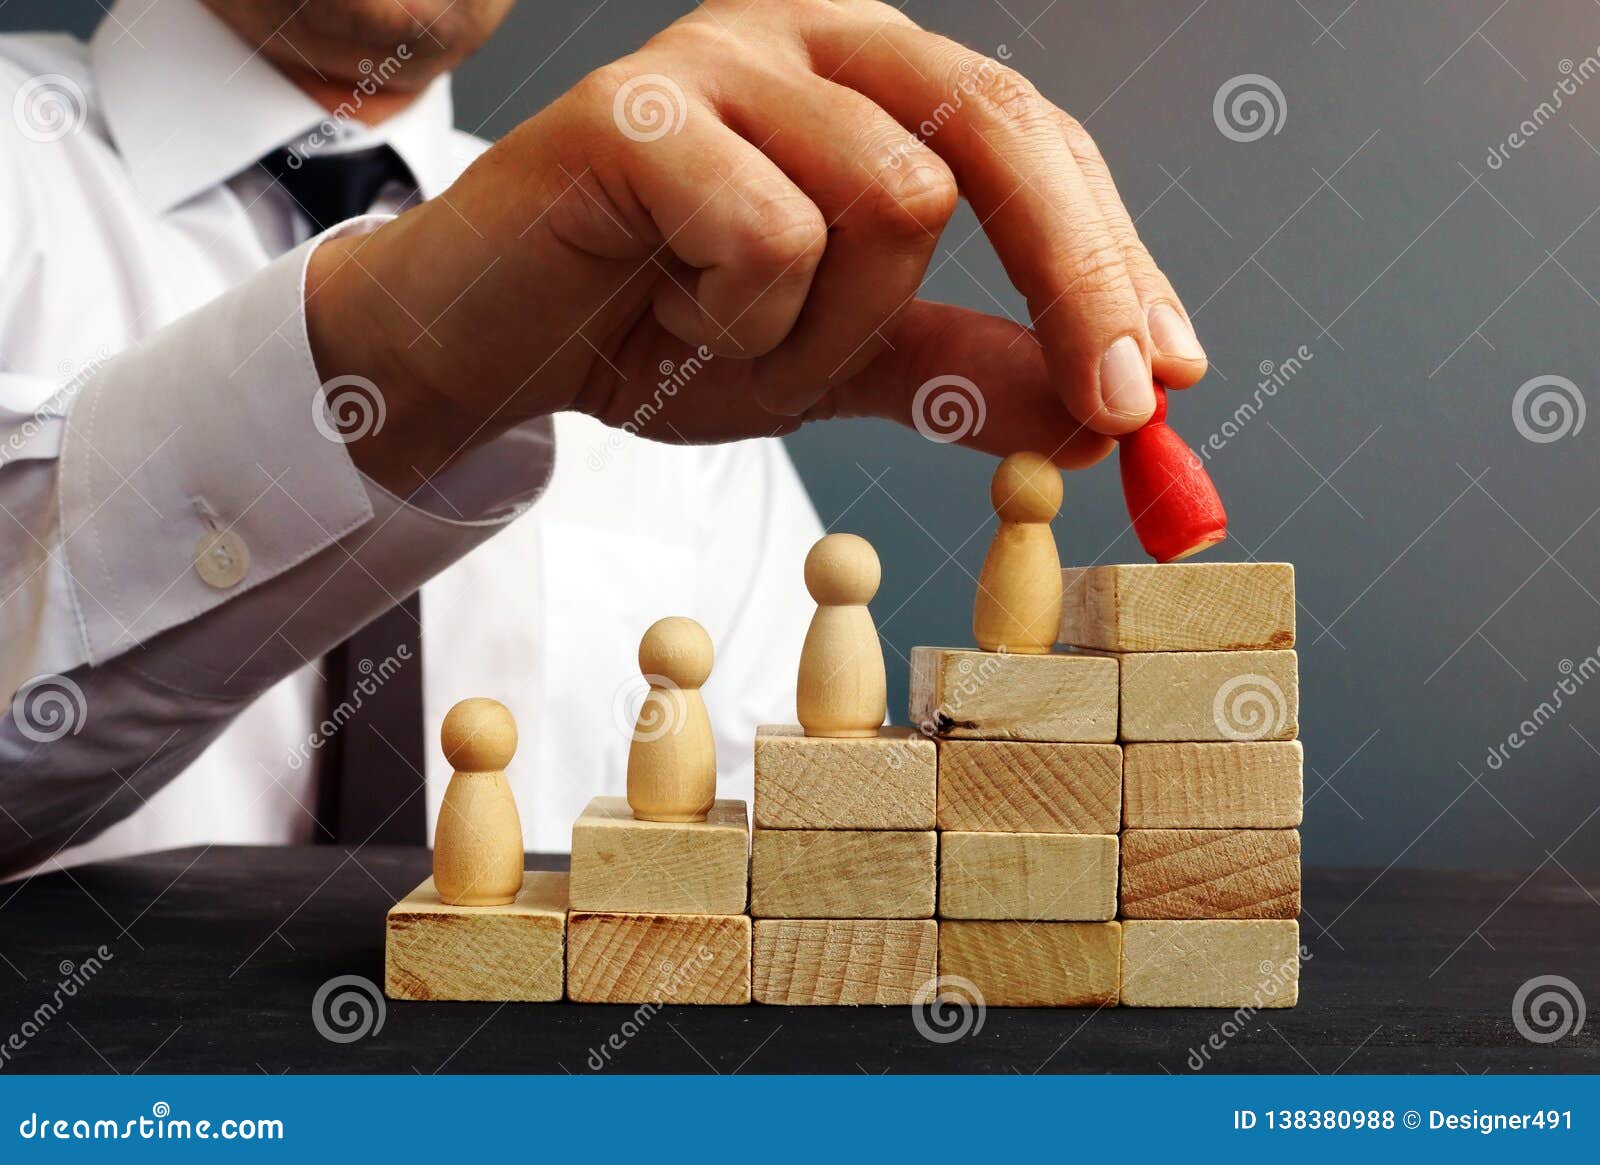 job promotion. manager is holding figurine near career ladder.